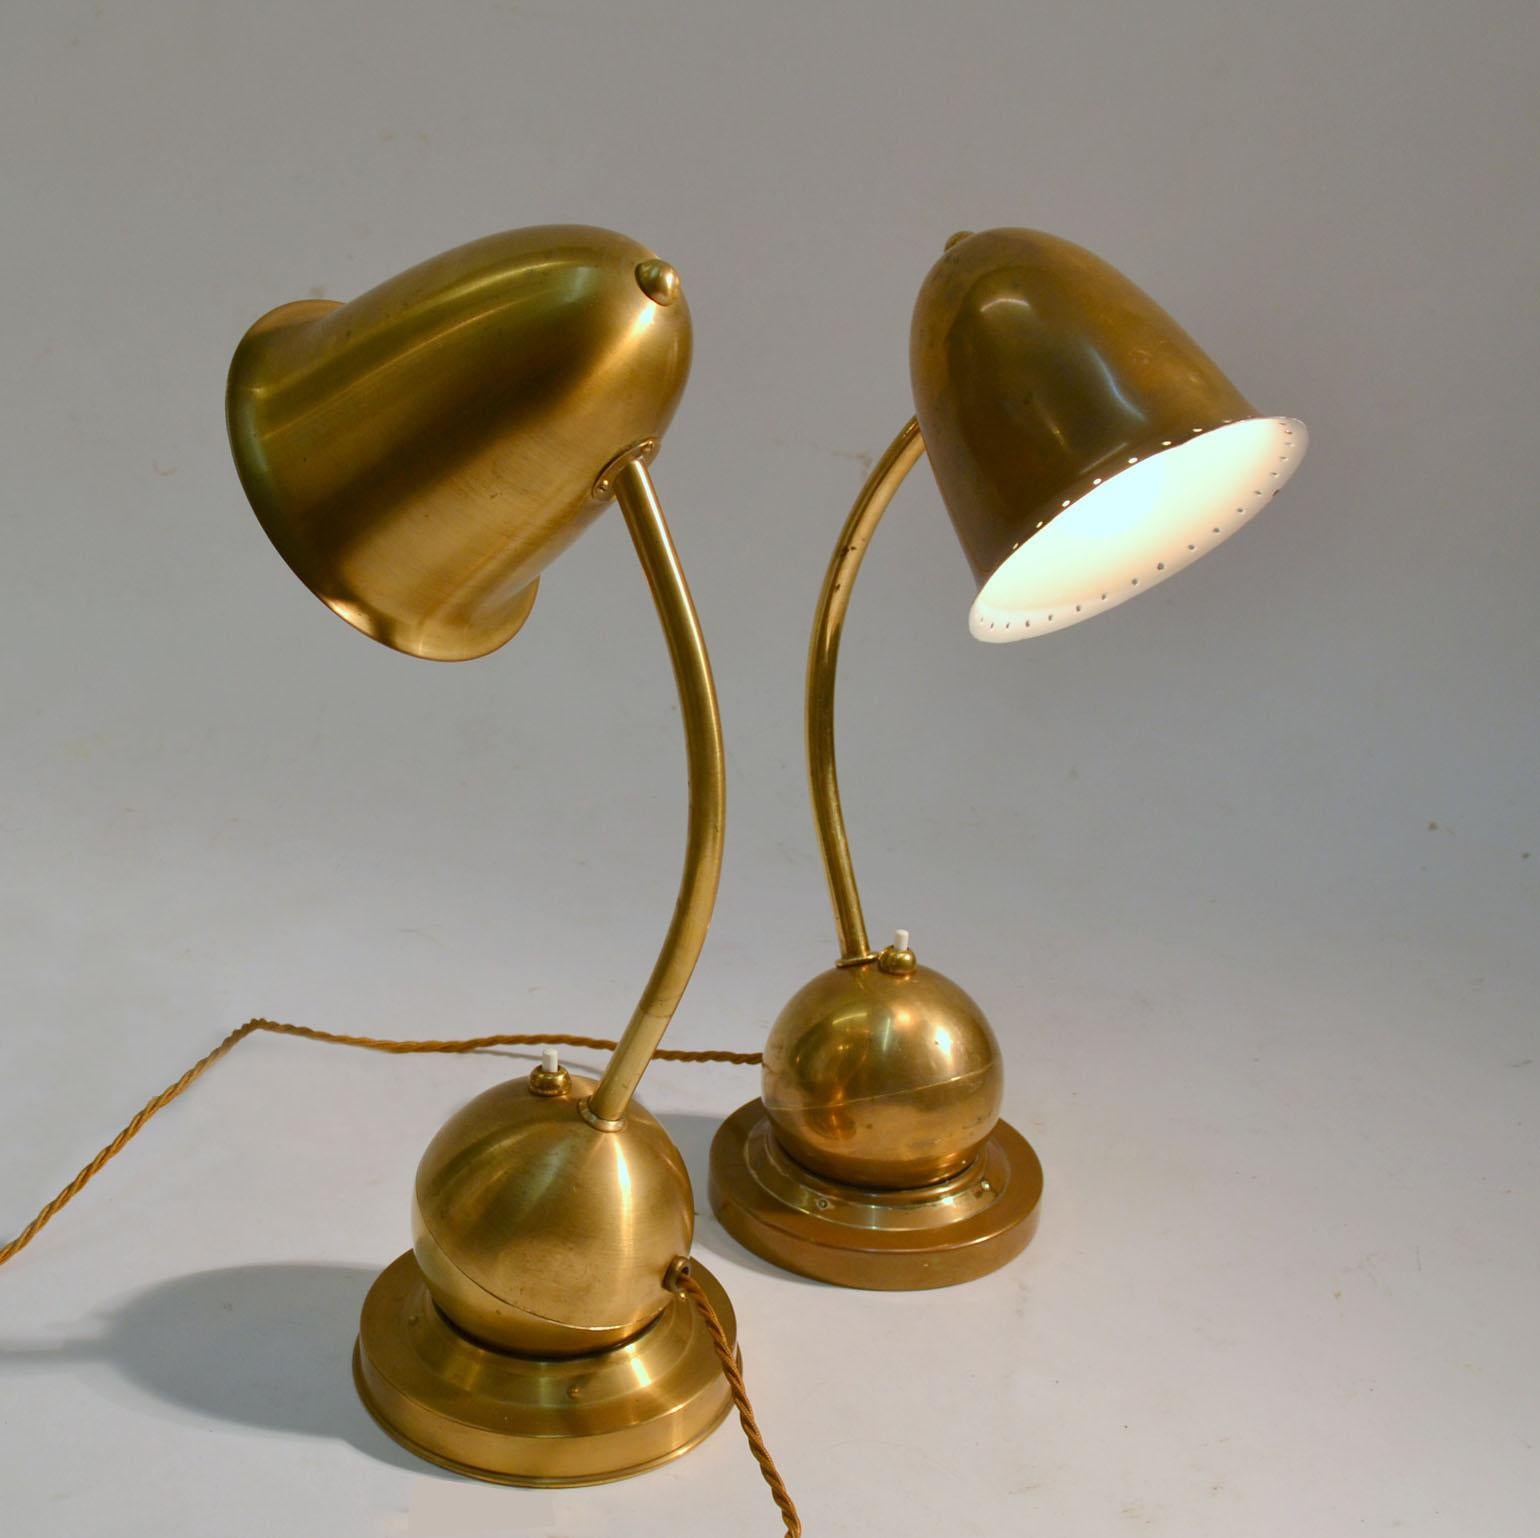 Pair of Modernist Brass Table / Desk Lamps 1930s Lamps by Daalderop Netherlands In Good Condition In London, GB